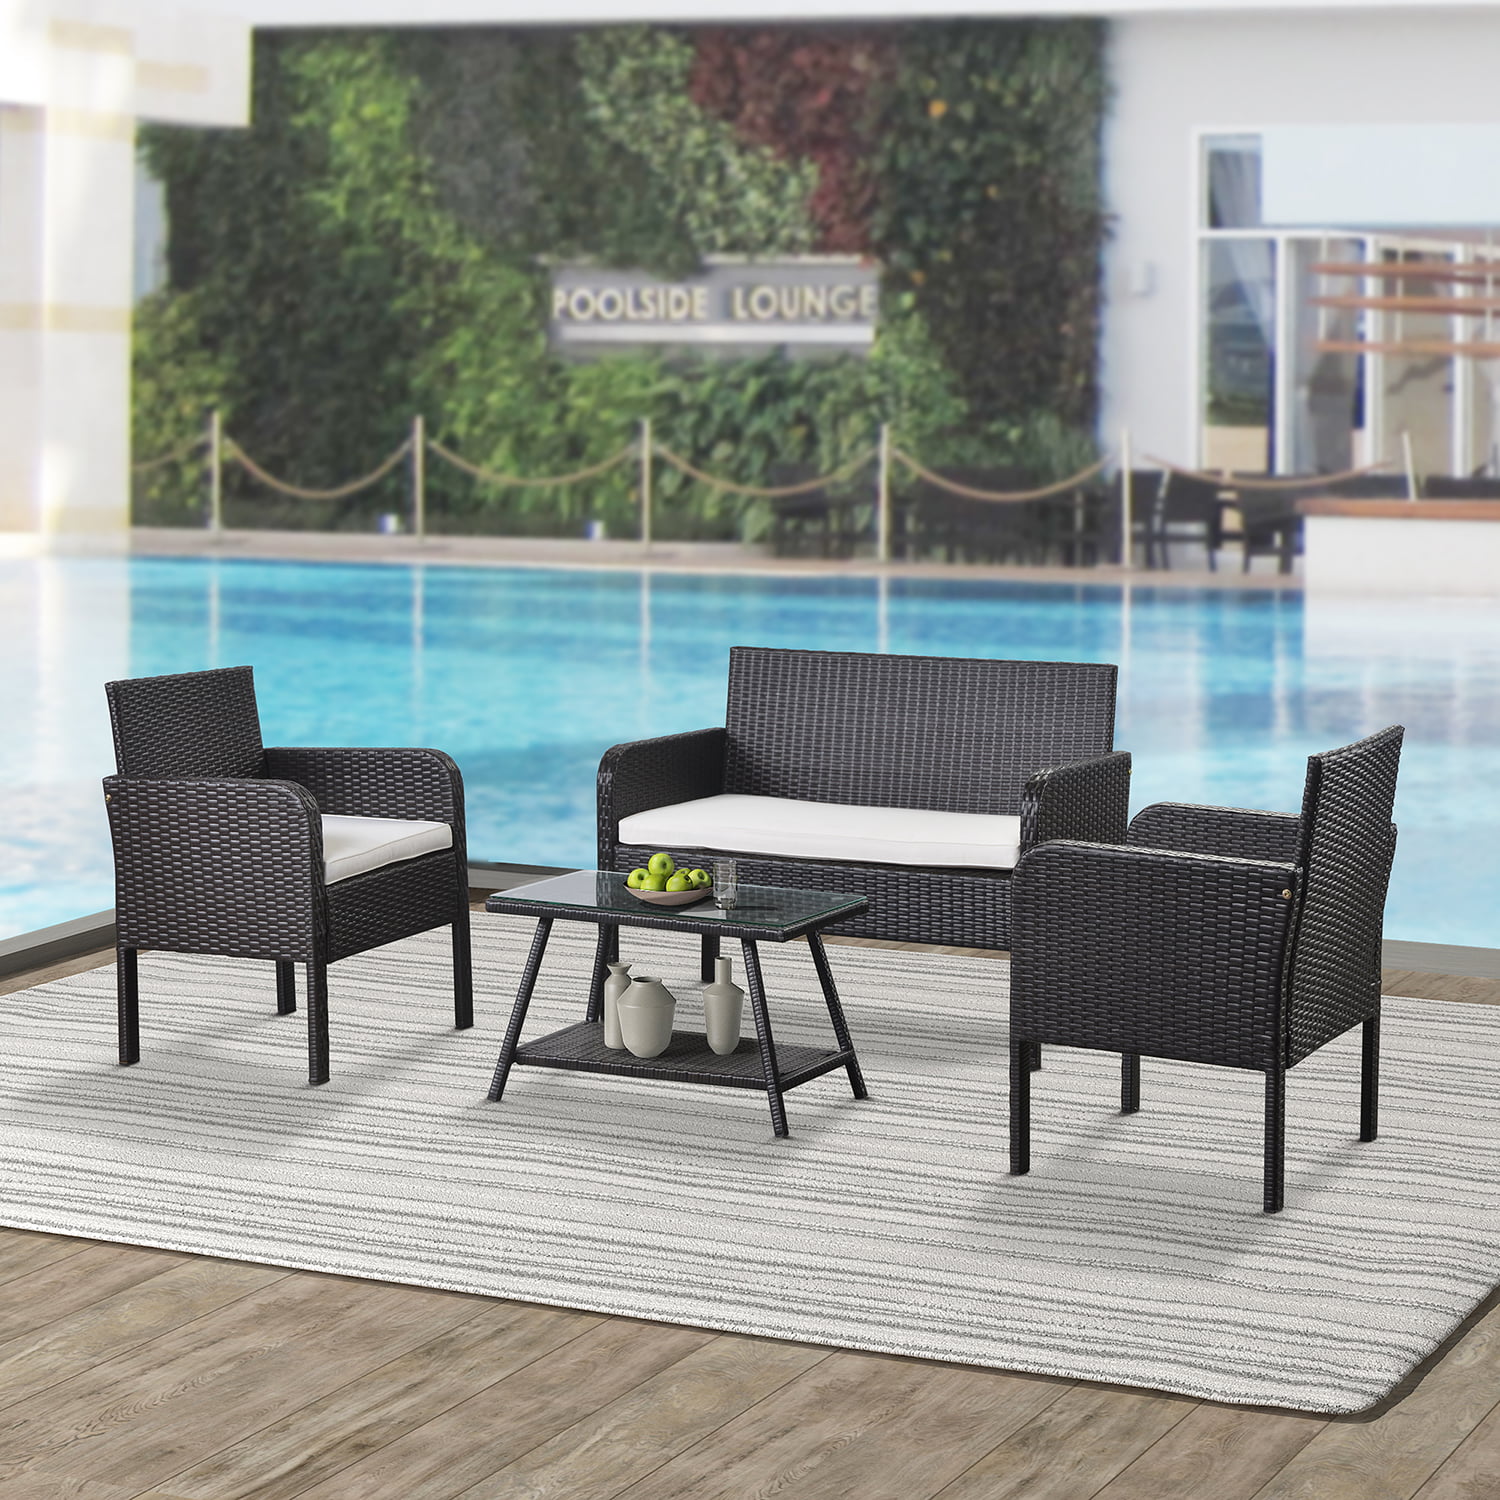 Outdoor Ratten Sofa U_Style 4 Piece Rattan Sofa Seating Group with Cushions 